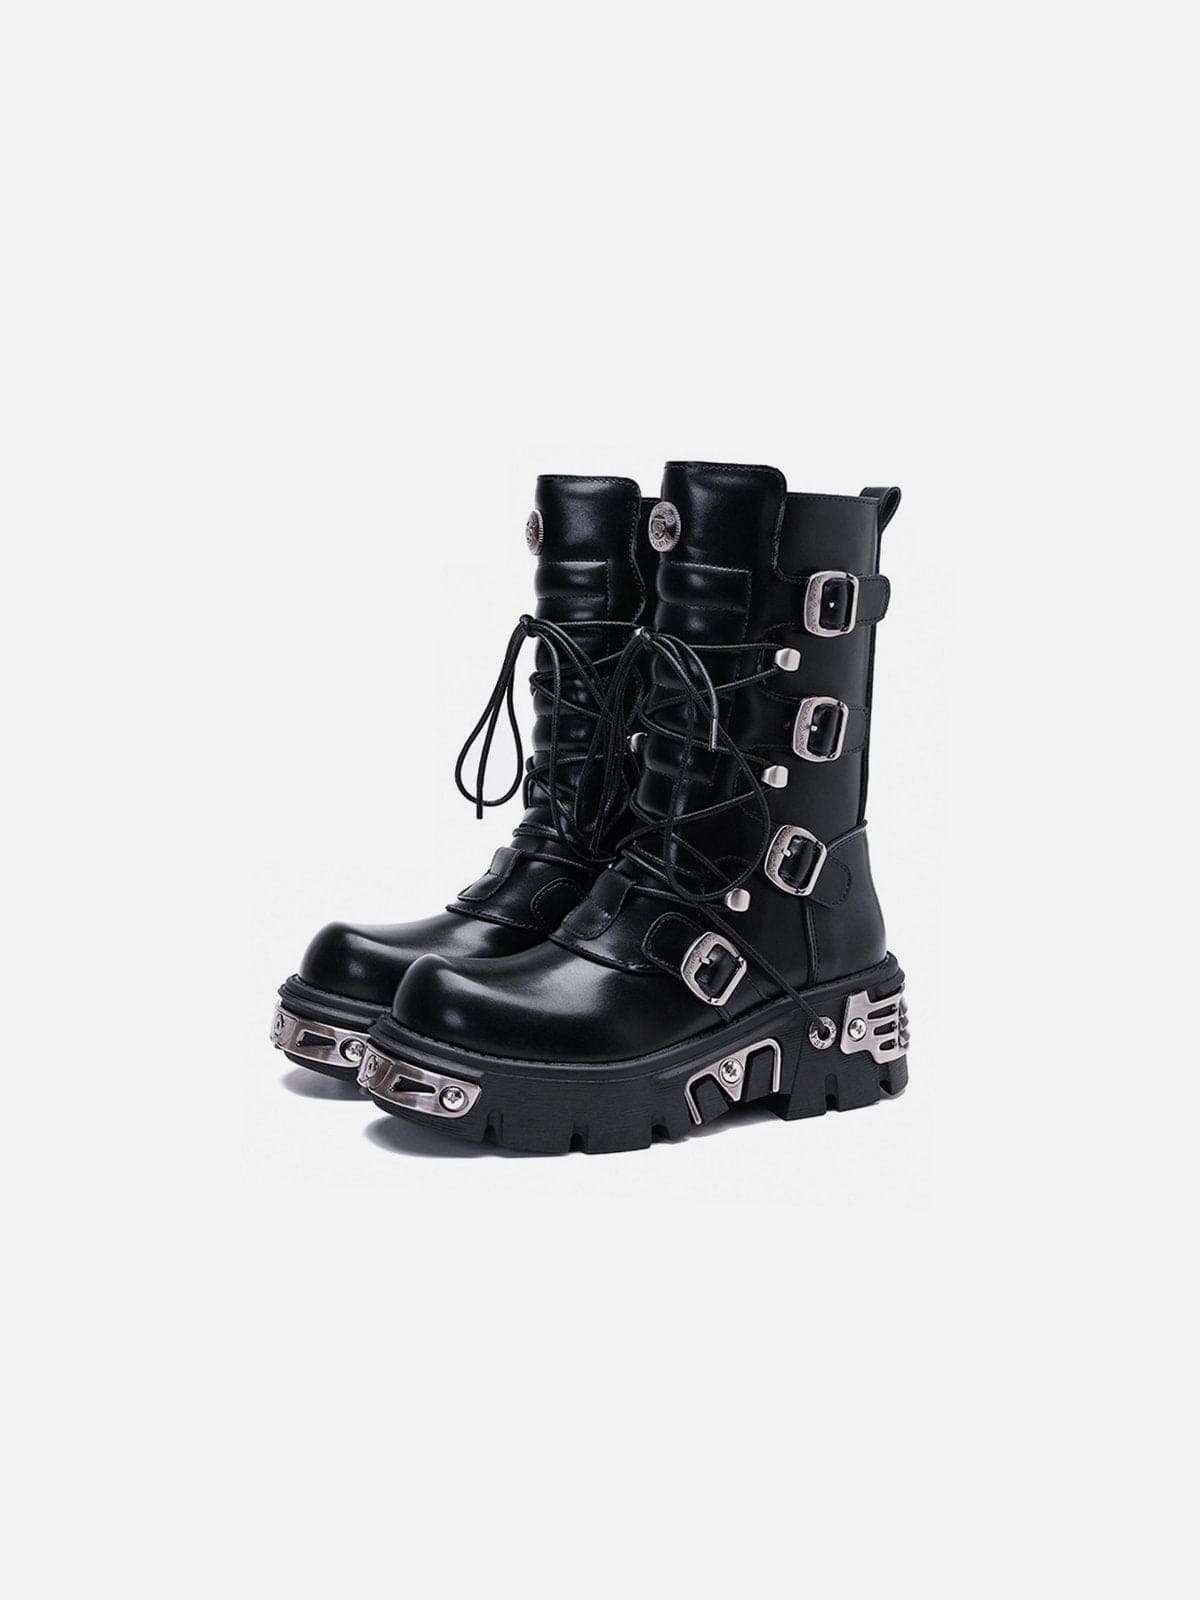 NEV Punk Metal Buckle Knight Boots